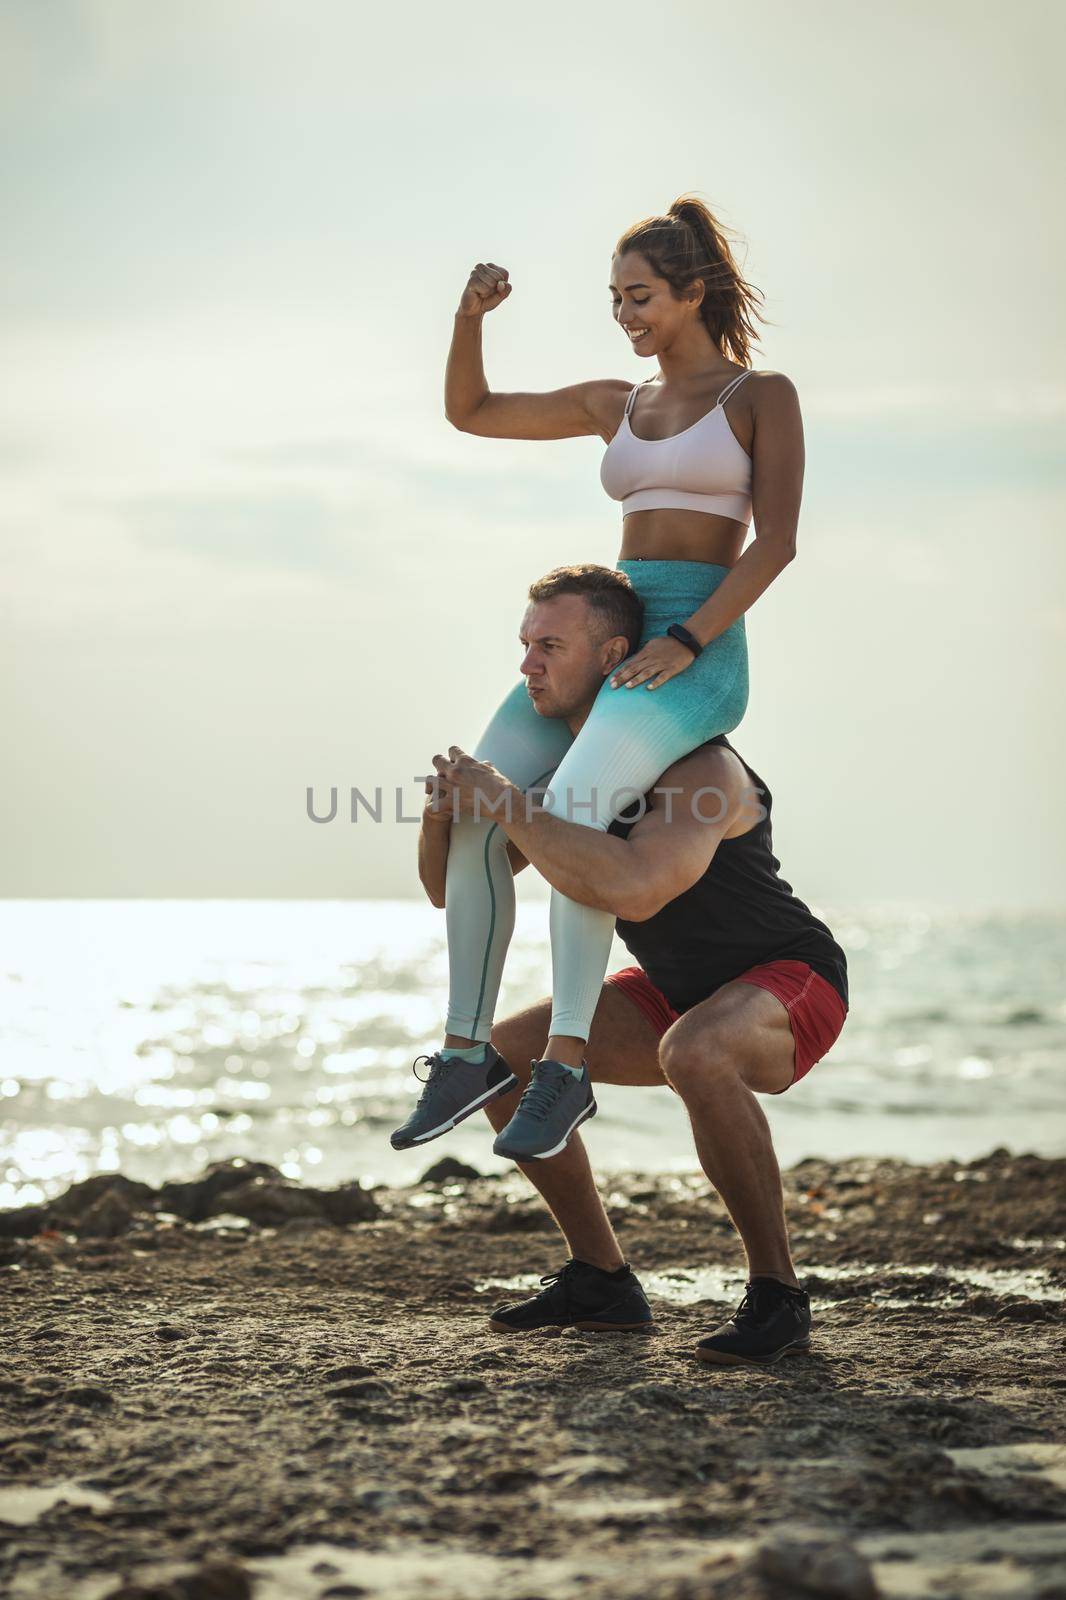 A handsome man is doing exercises on a sea beach with a girl on his shoulders.